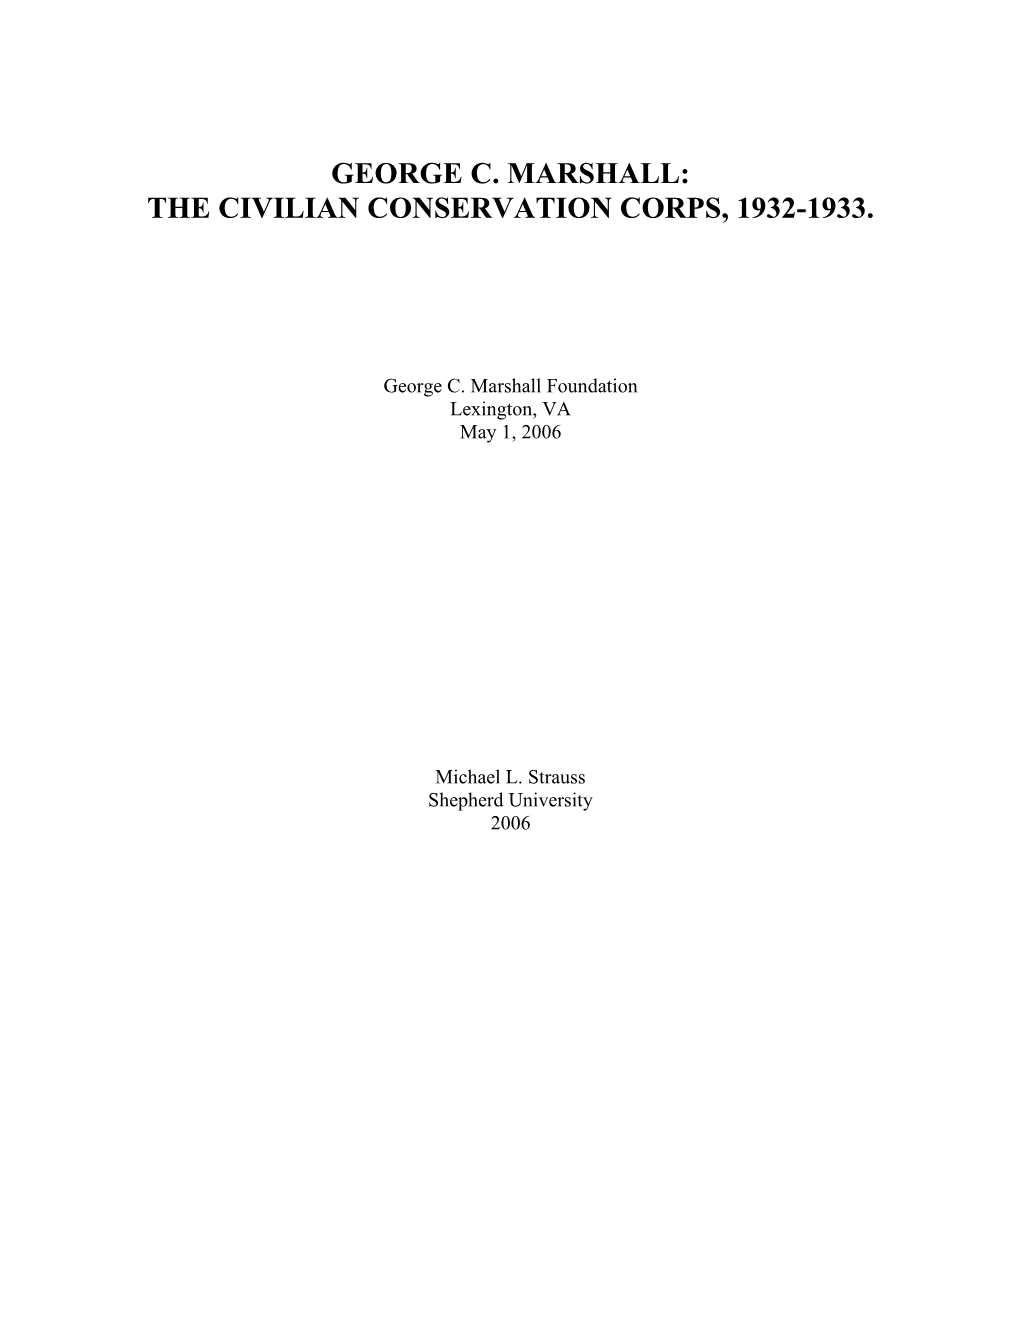 George C. Marshall: the Civilian Conservation Corps, 1932-1933